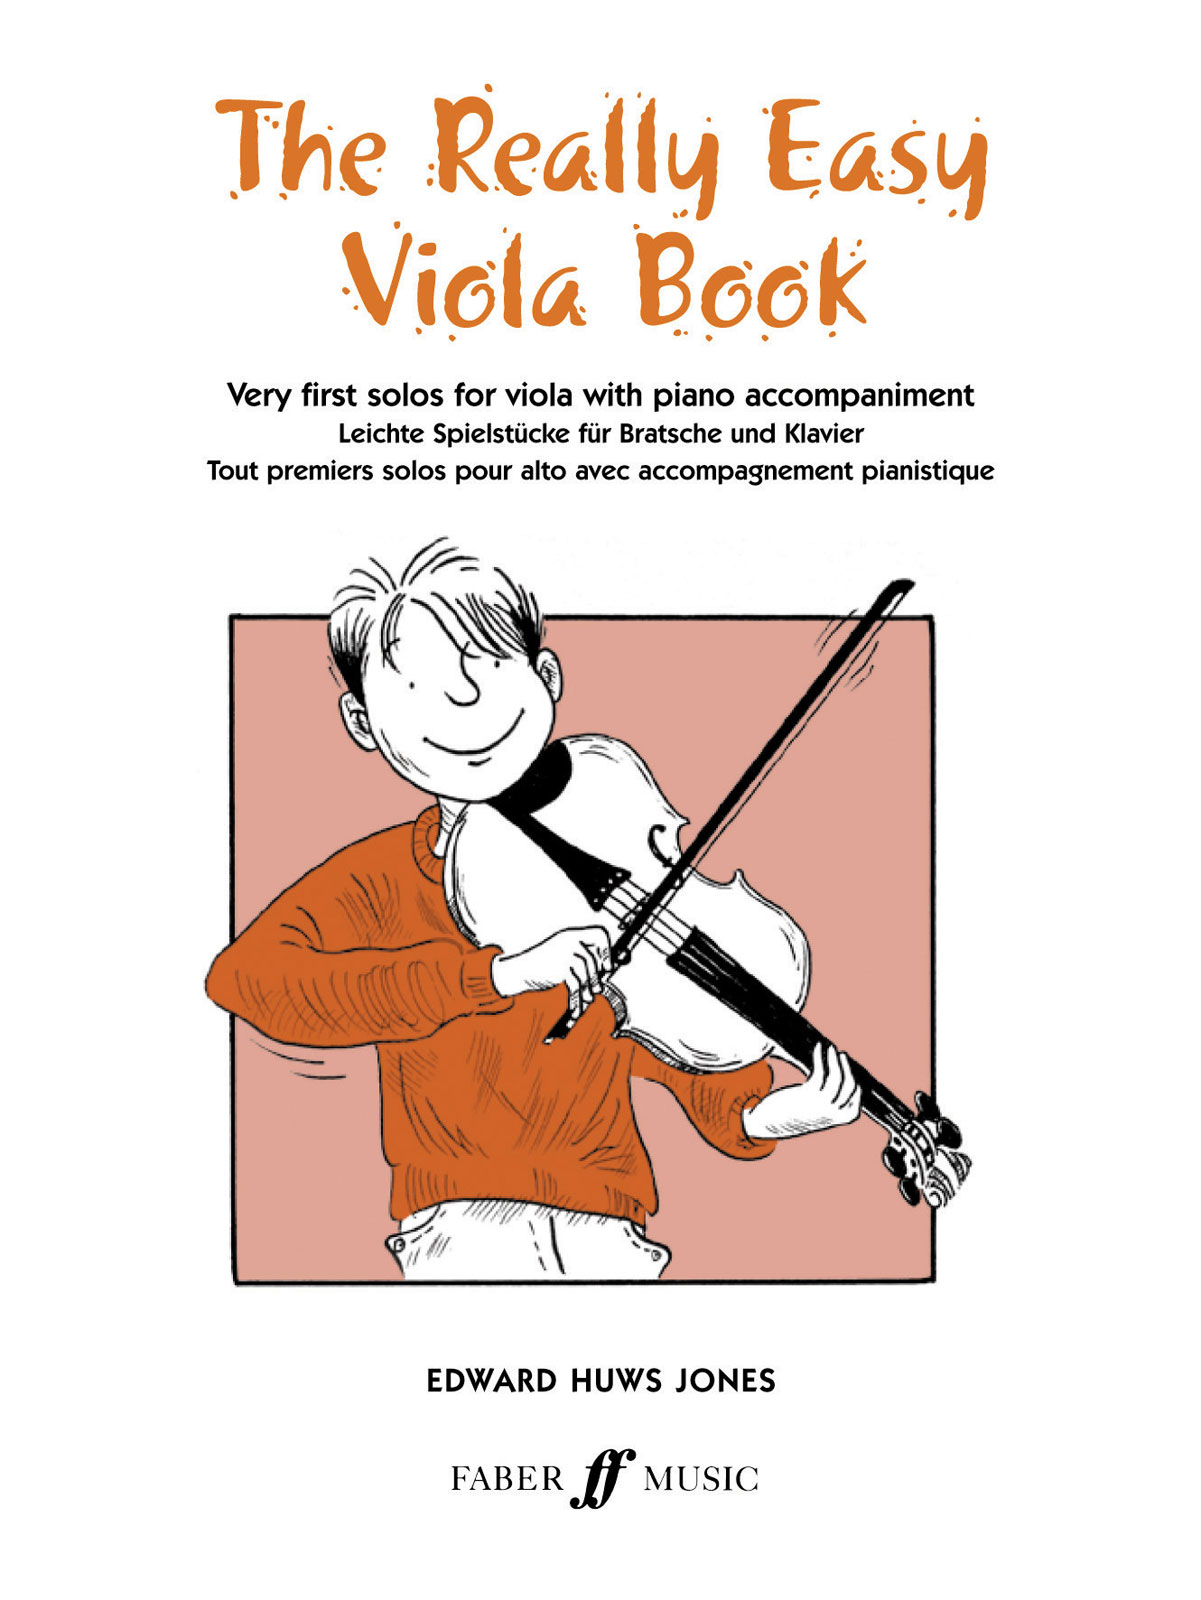 FABER MUSIC HUWS JONES - THE REALLY EASY VIOLA BOOK